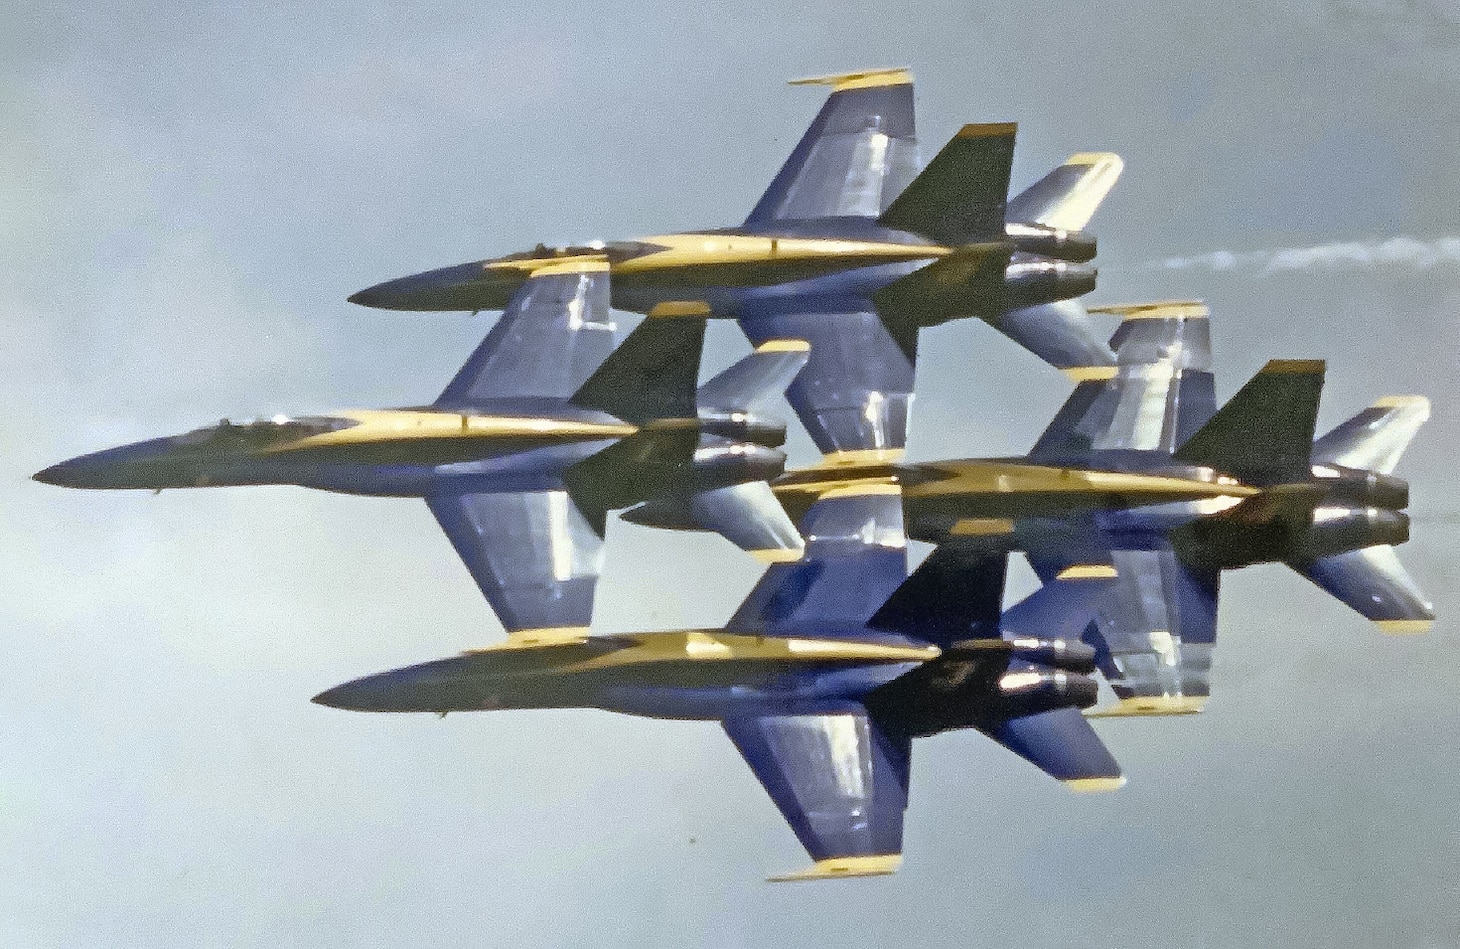 No photo probably describes the pilot skill and attending danger than this view of the Blue Angels’ signature four-plane Diamond 360, when the team’s four formation pilots are flying overlapped with just 36 inches of separation between aircraft. The No. 3 aircraft’s canopy is only 18 inches from the Boss’s left wing tip.